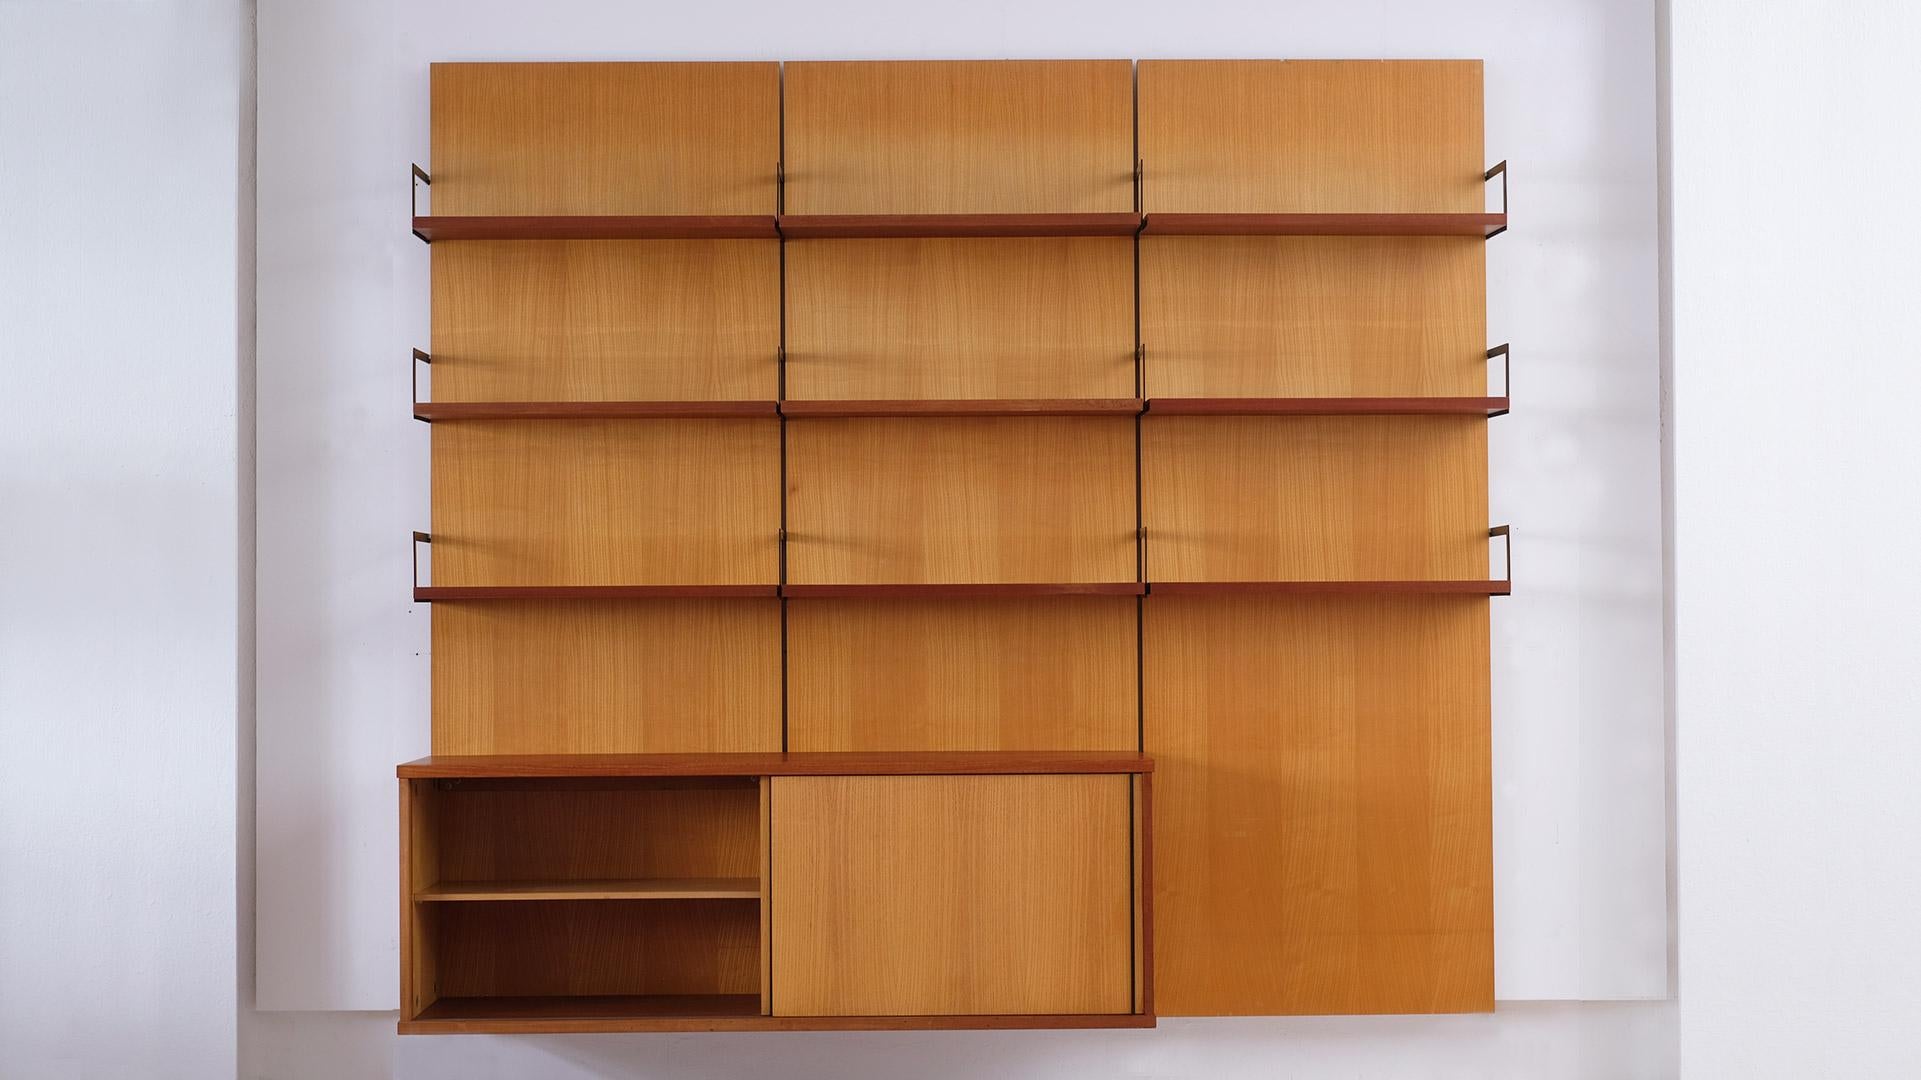 Rare and beautiful wall unit with back panels in ash and contrasting teak shelves and sideboard designed by Cees Braakman for UMS Pastoe, Utrecht, 1958.